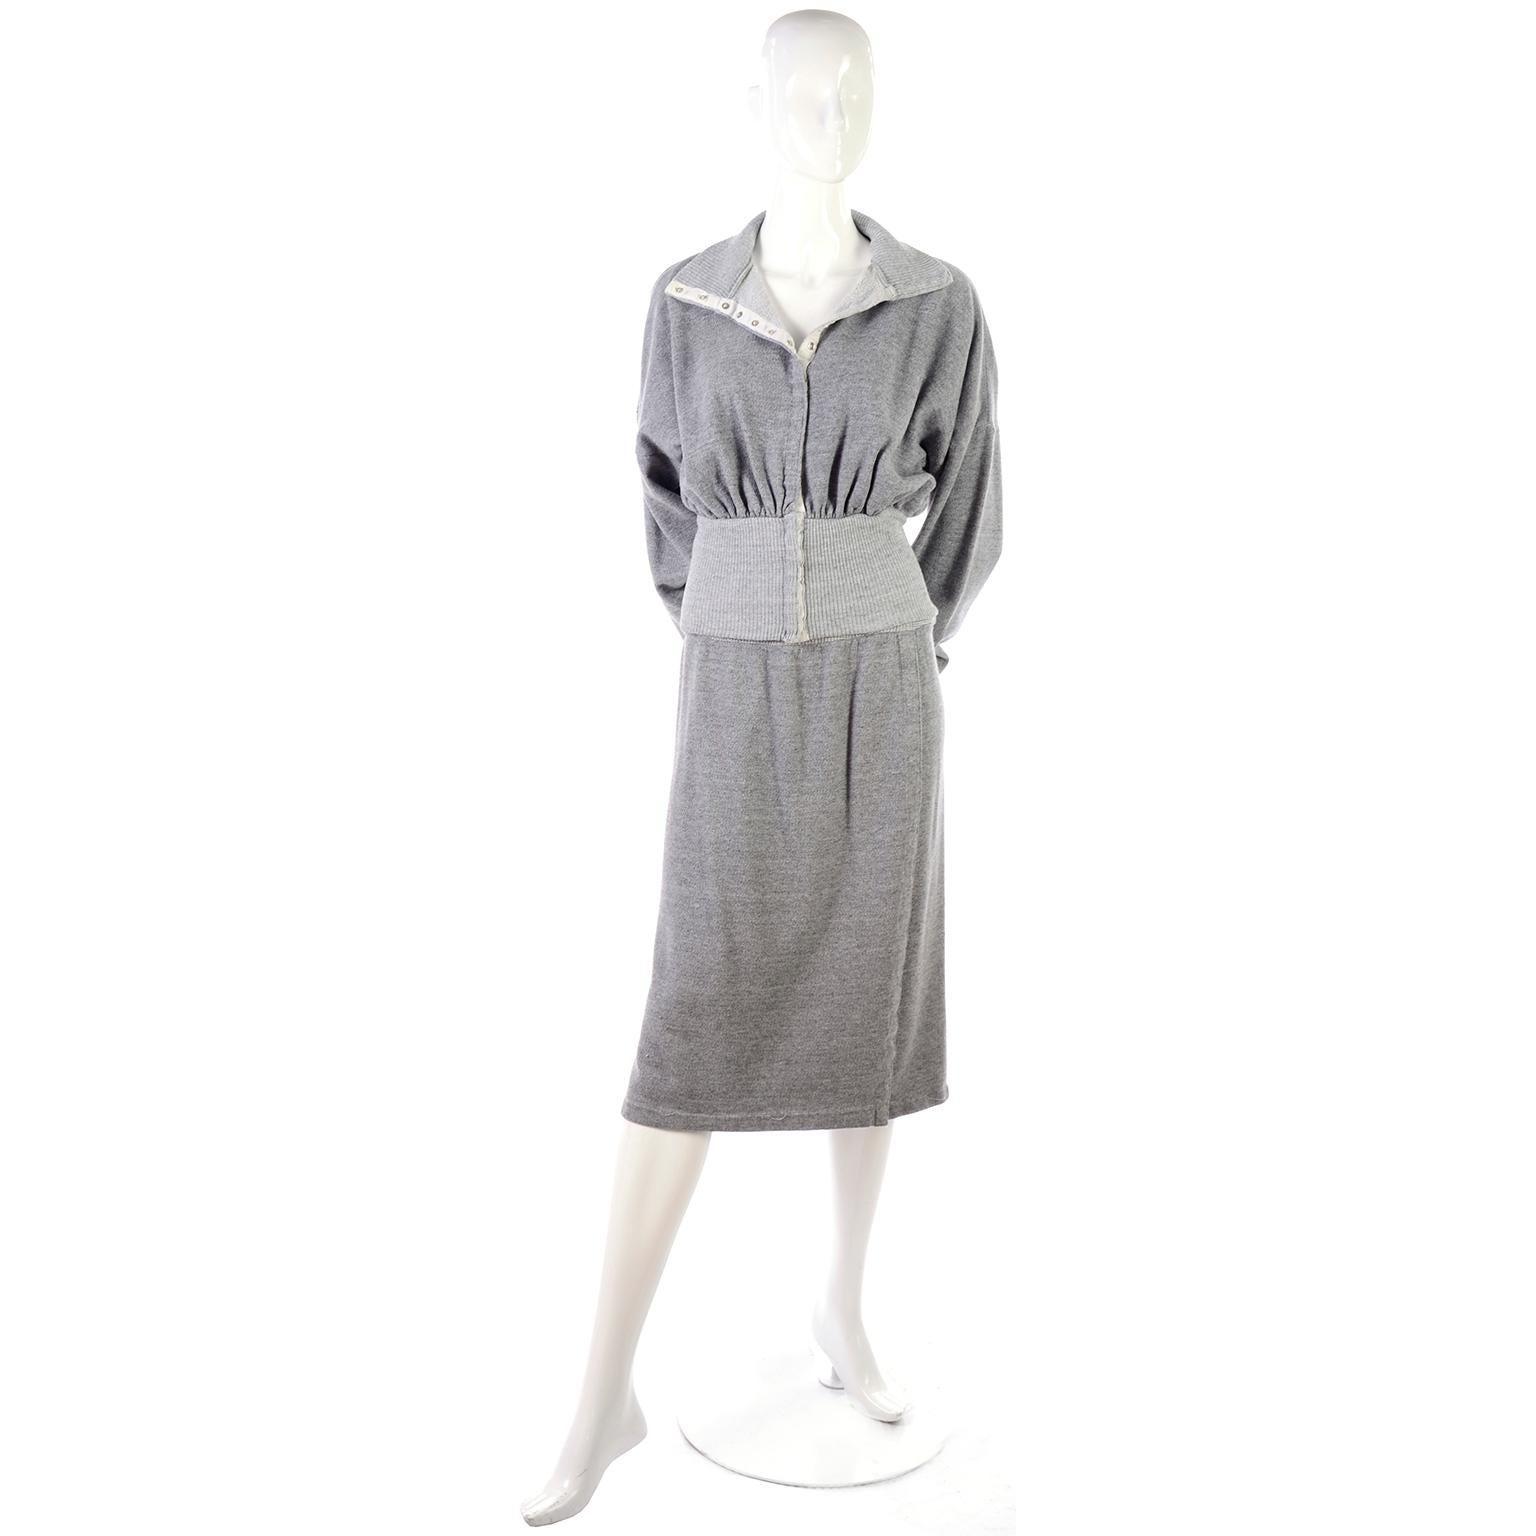 This is an iconic outfit in an extremely soft heathered gray cotton iconic sweatshirt material  by Norma Kamali. The skirt has an elastic band at the waist and high hip, and a slight front wrap that closes with snaps in the front. The snaps can be